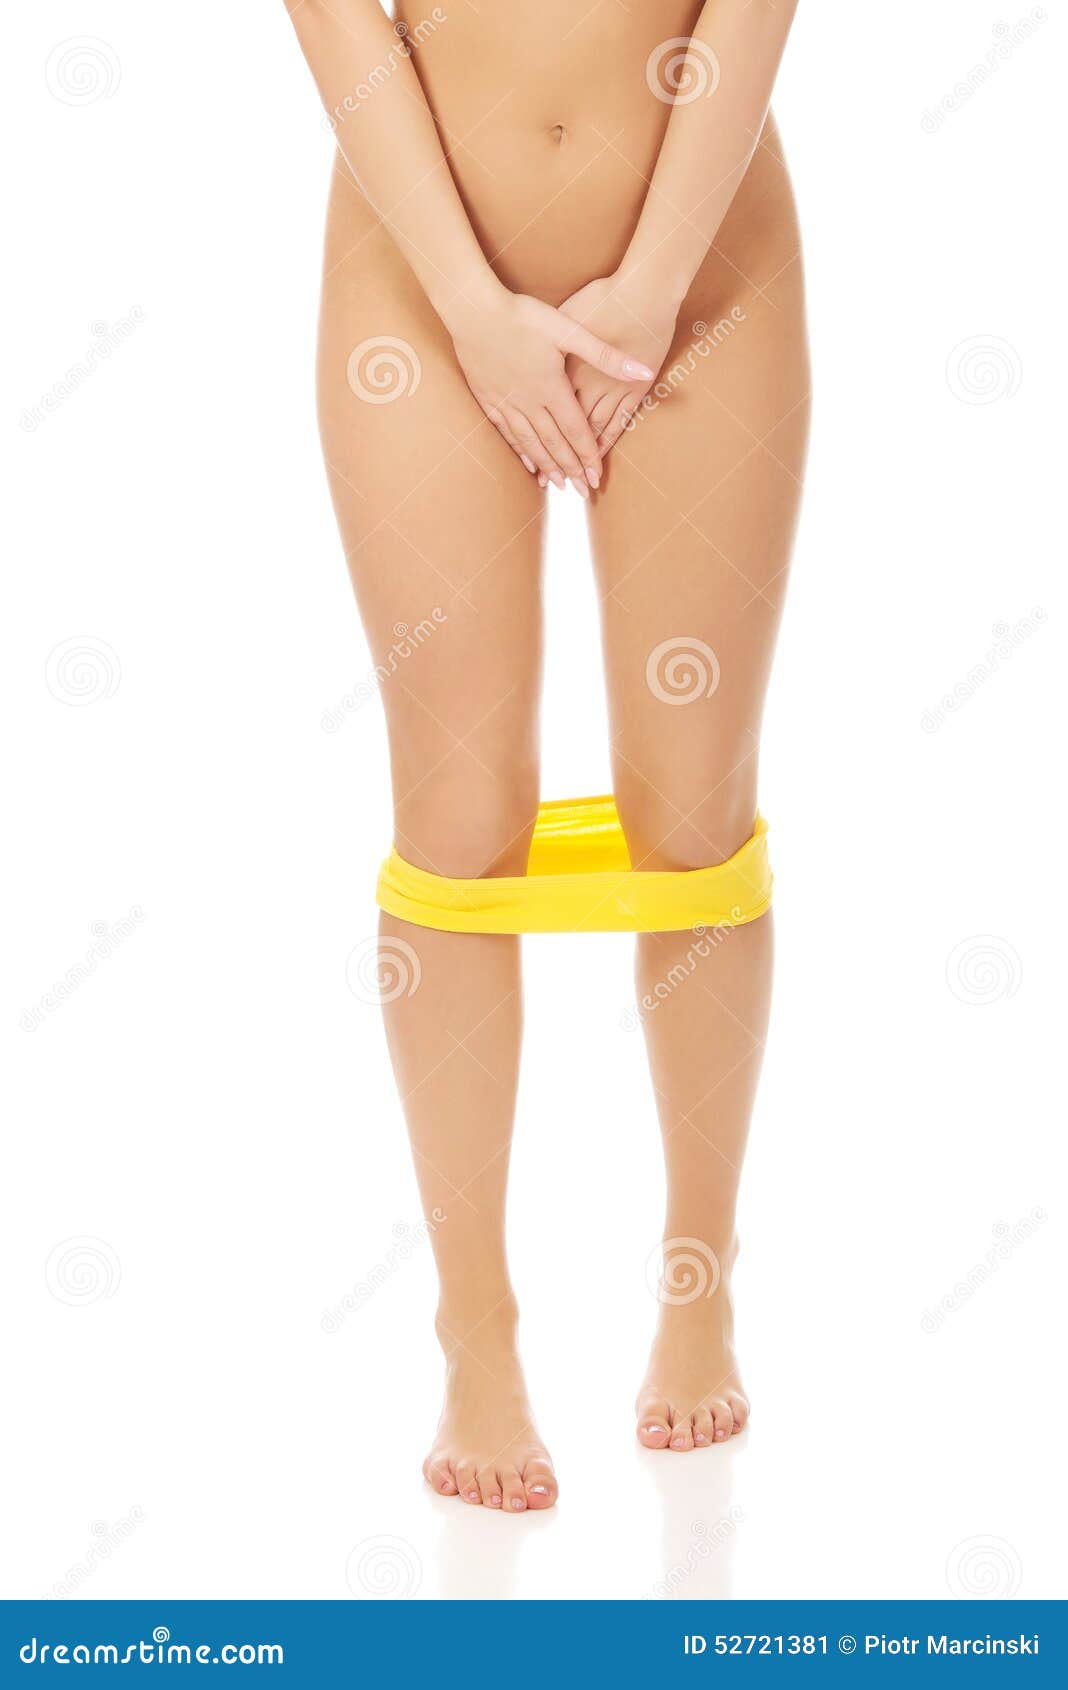 Undressed Woman Holding Her Crotch. Stock Image - Image of pain